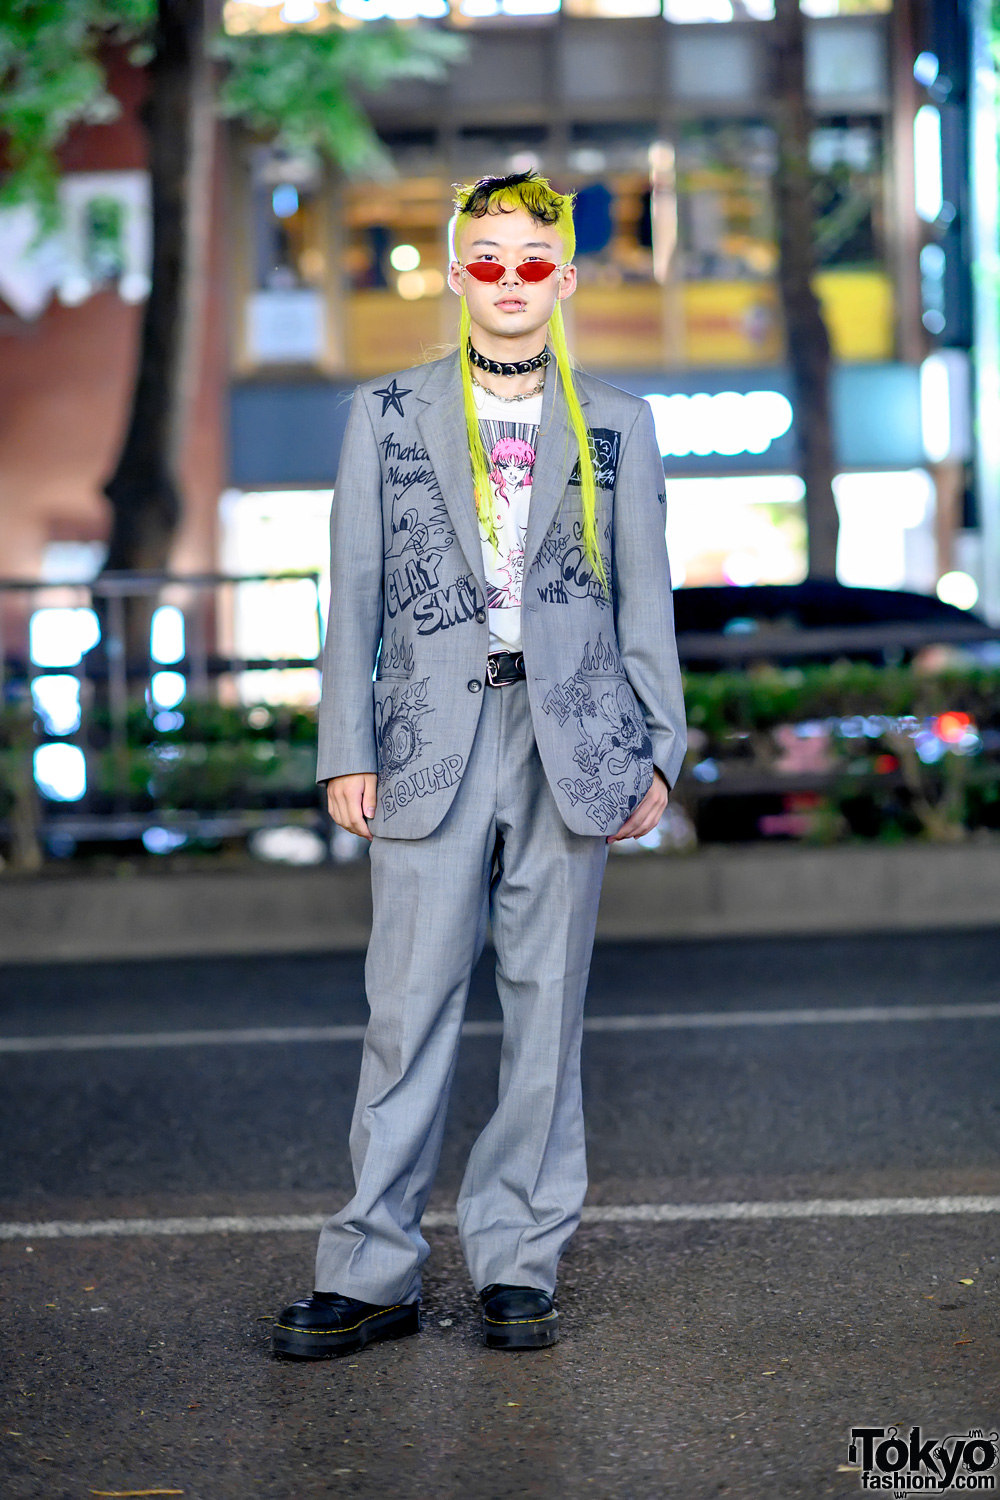 Remake Suit Style in Tokyo w/ Yellow Hair, Cat Eye Sunglasses, Graffiti Print Suit, Kobinai, Never Mind the XU & Dr. Martens Boots